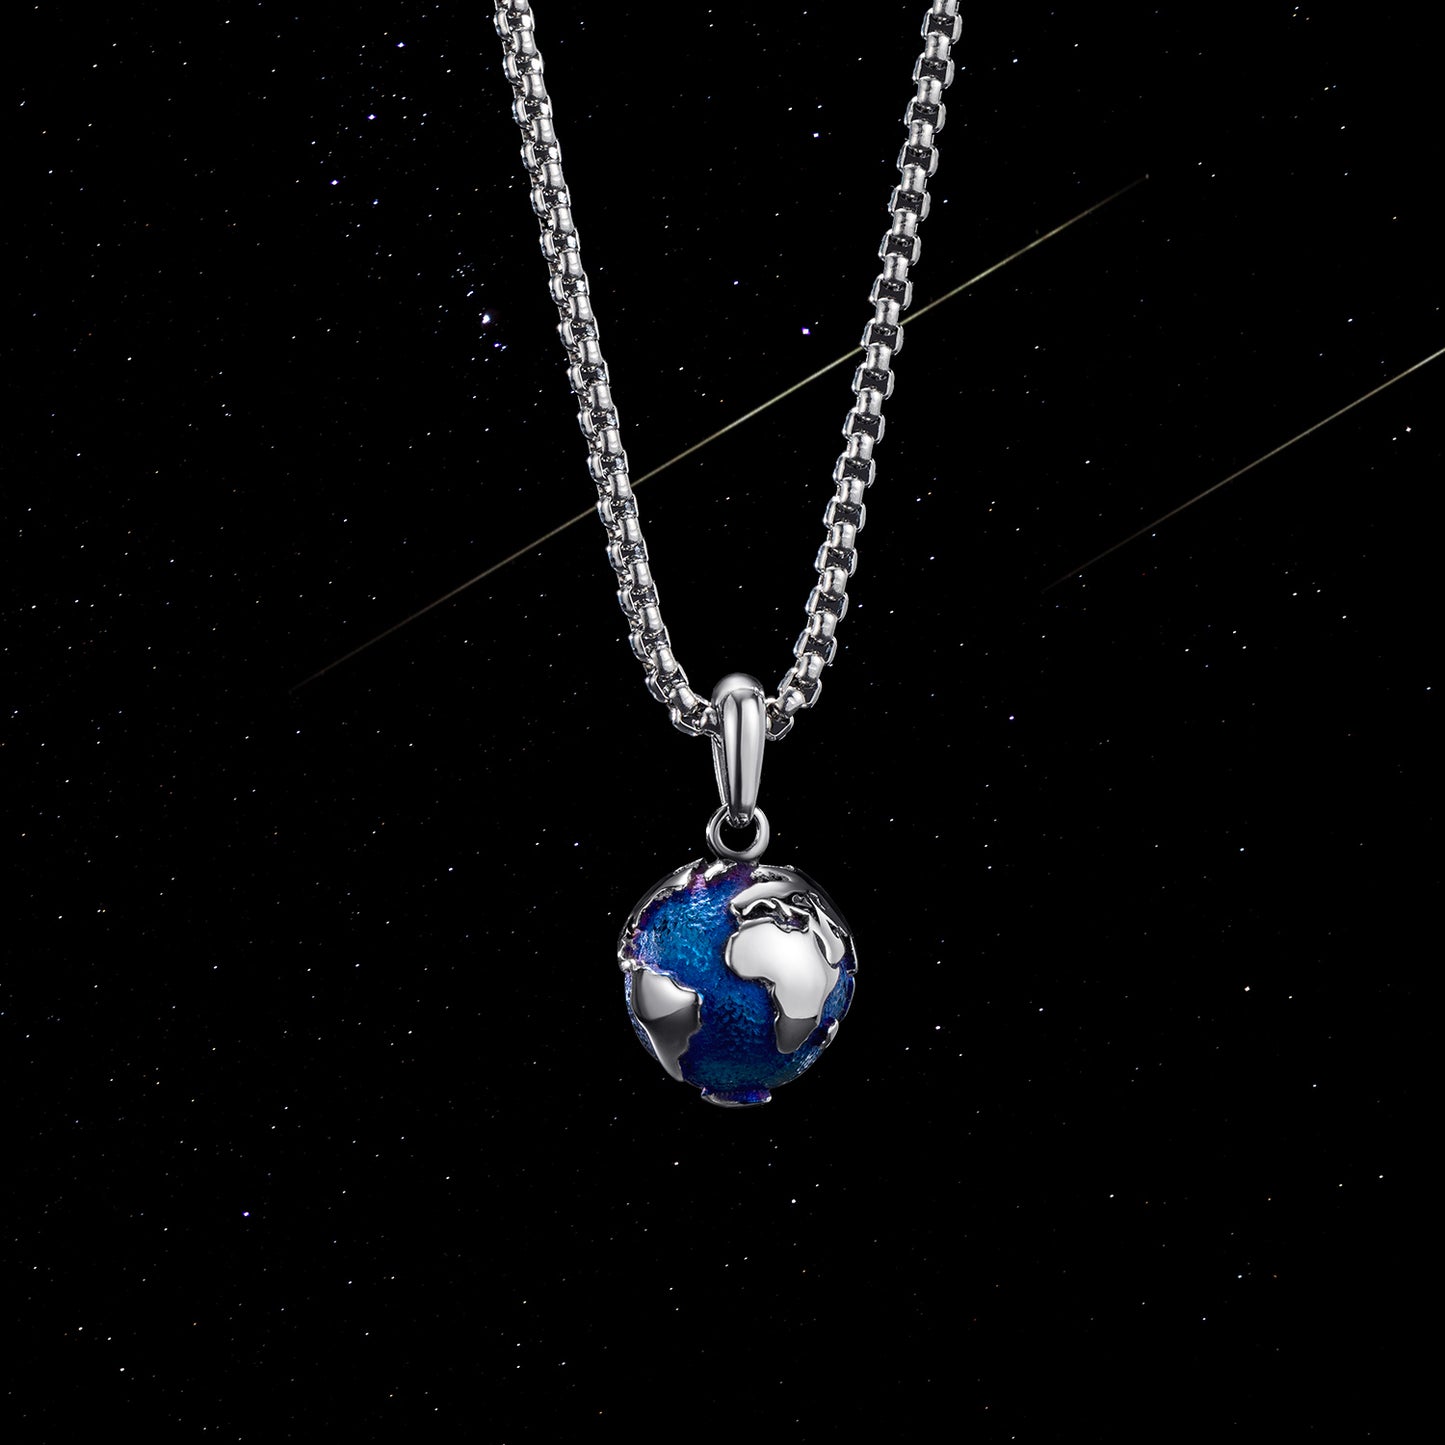 KINGKA Stainless Steel World Map Pendant Necklace, Blue Silver